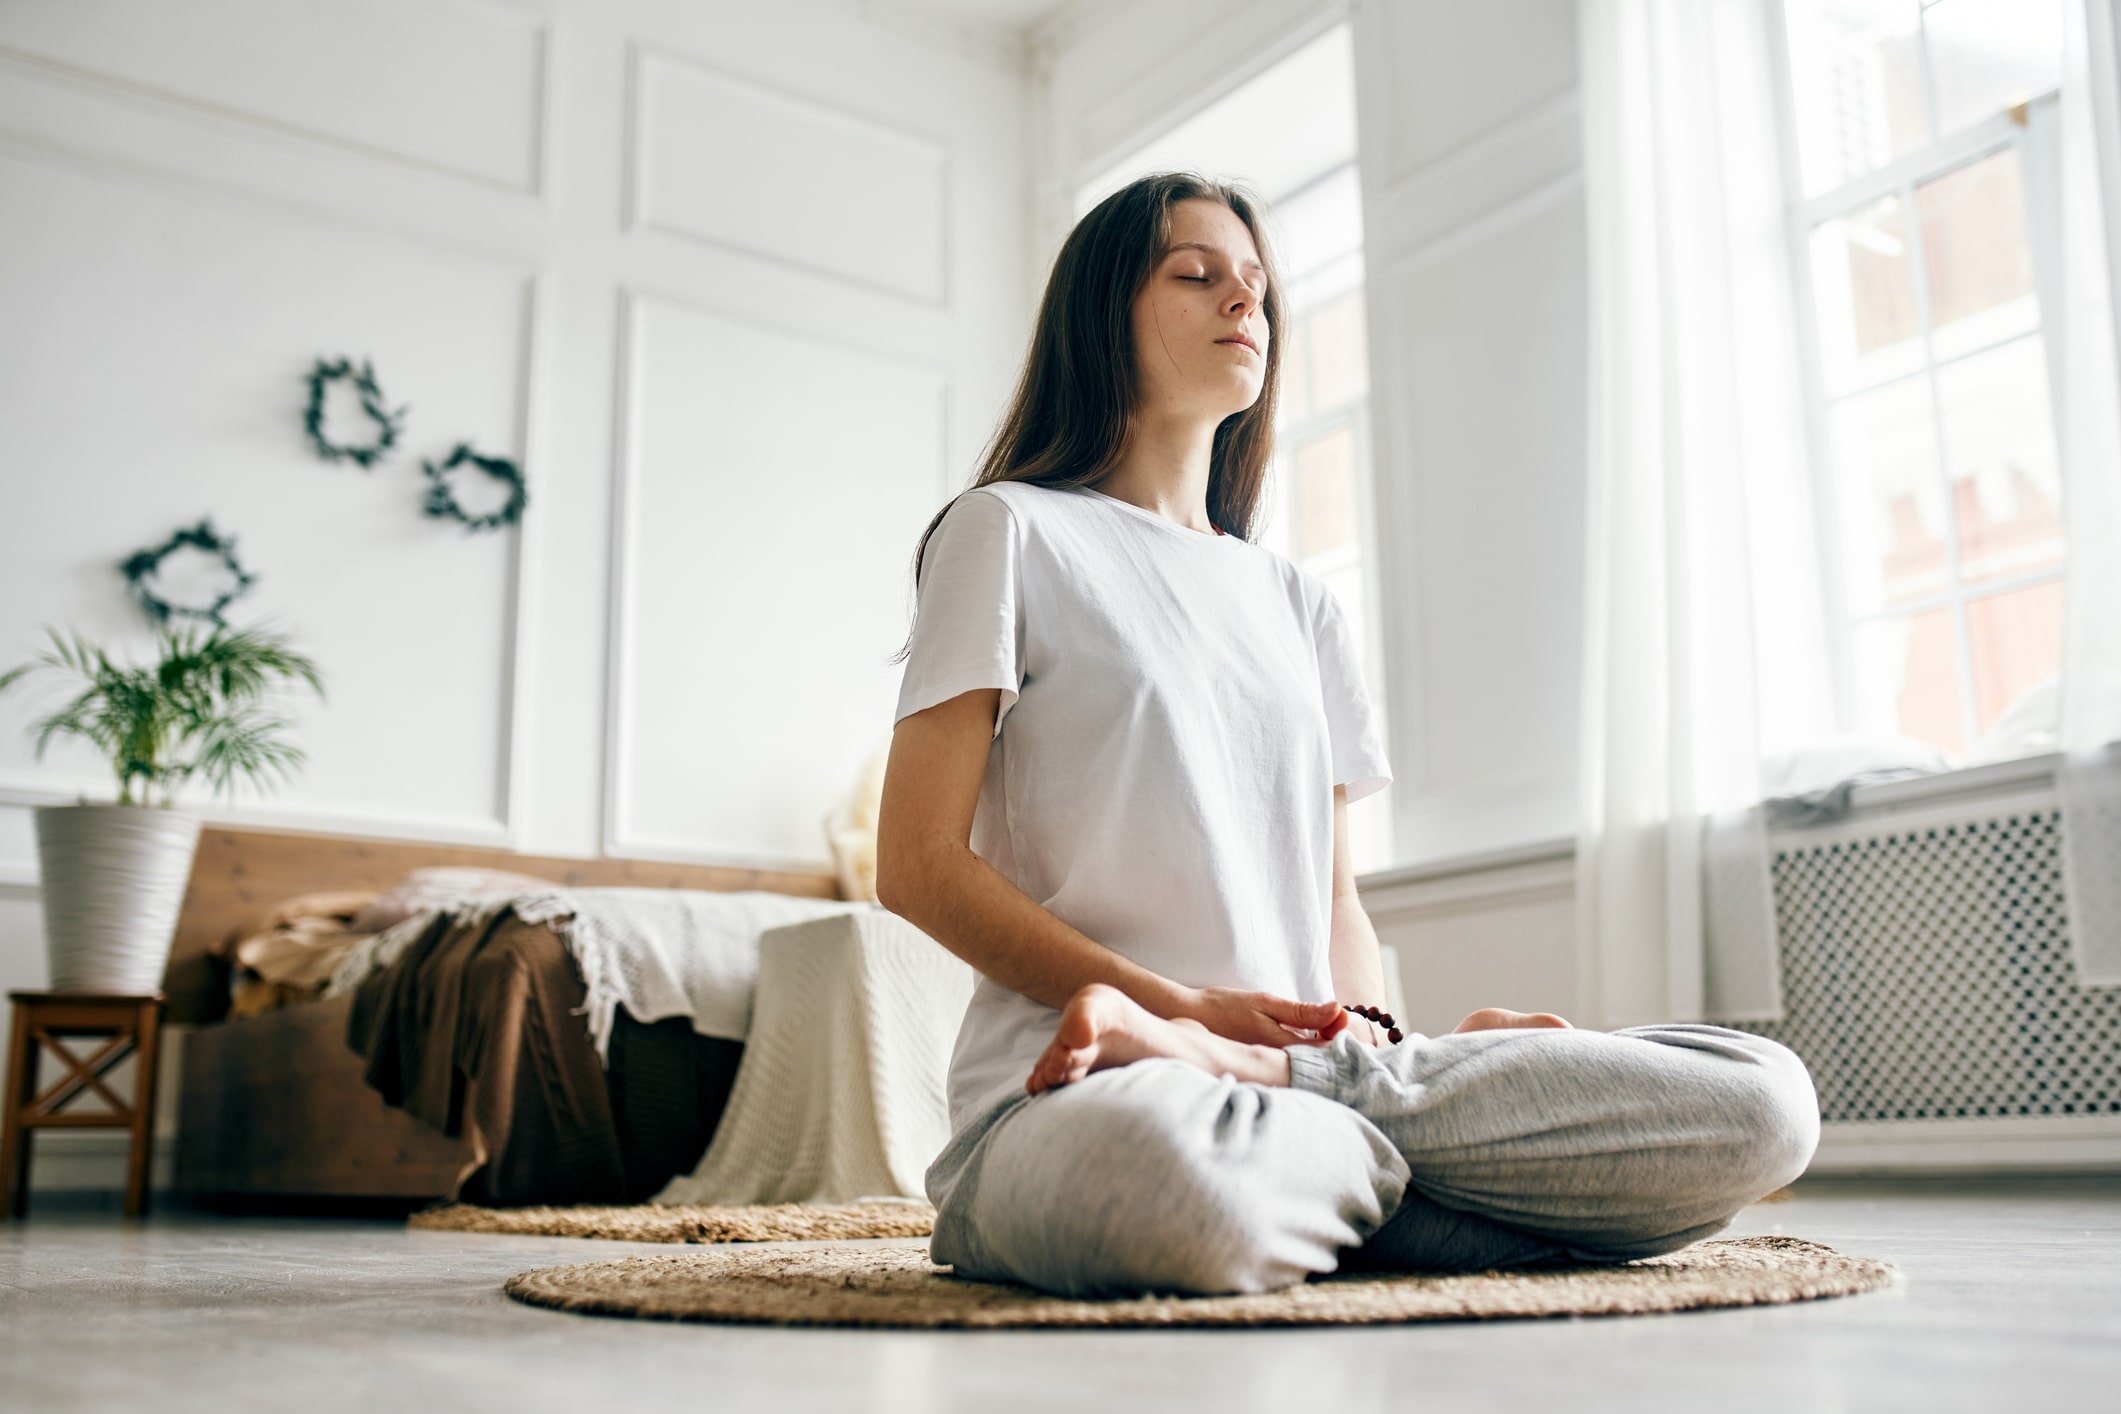 Meditation Positions: How to Sit Properly for Meditation? - Fitsri Yoga